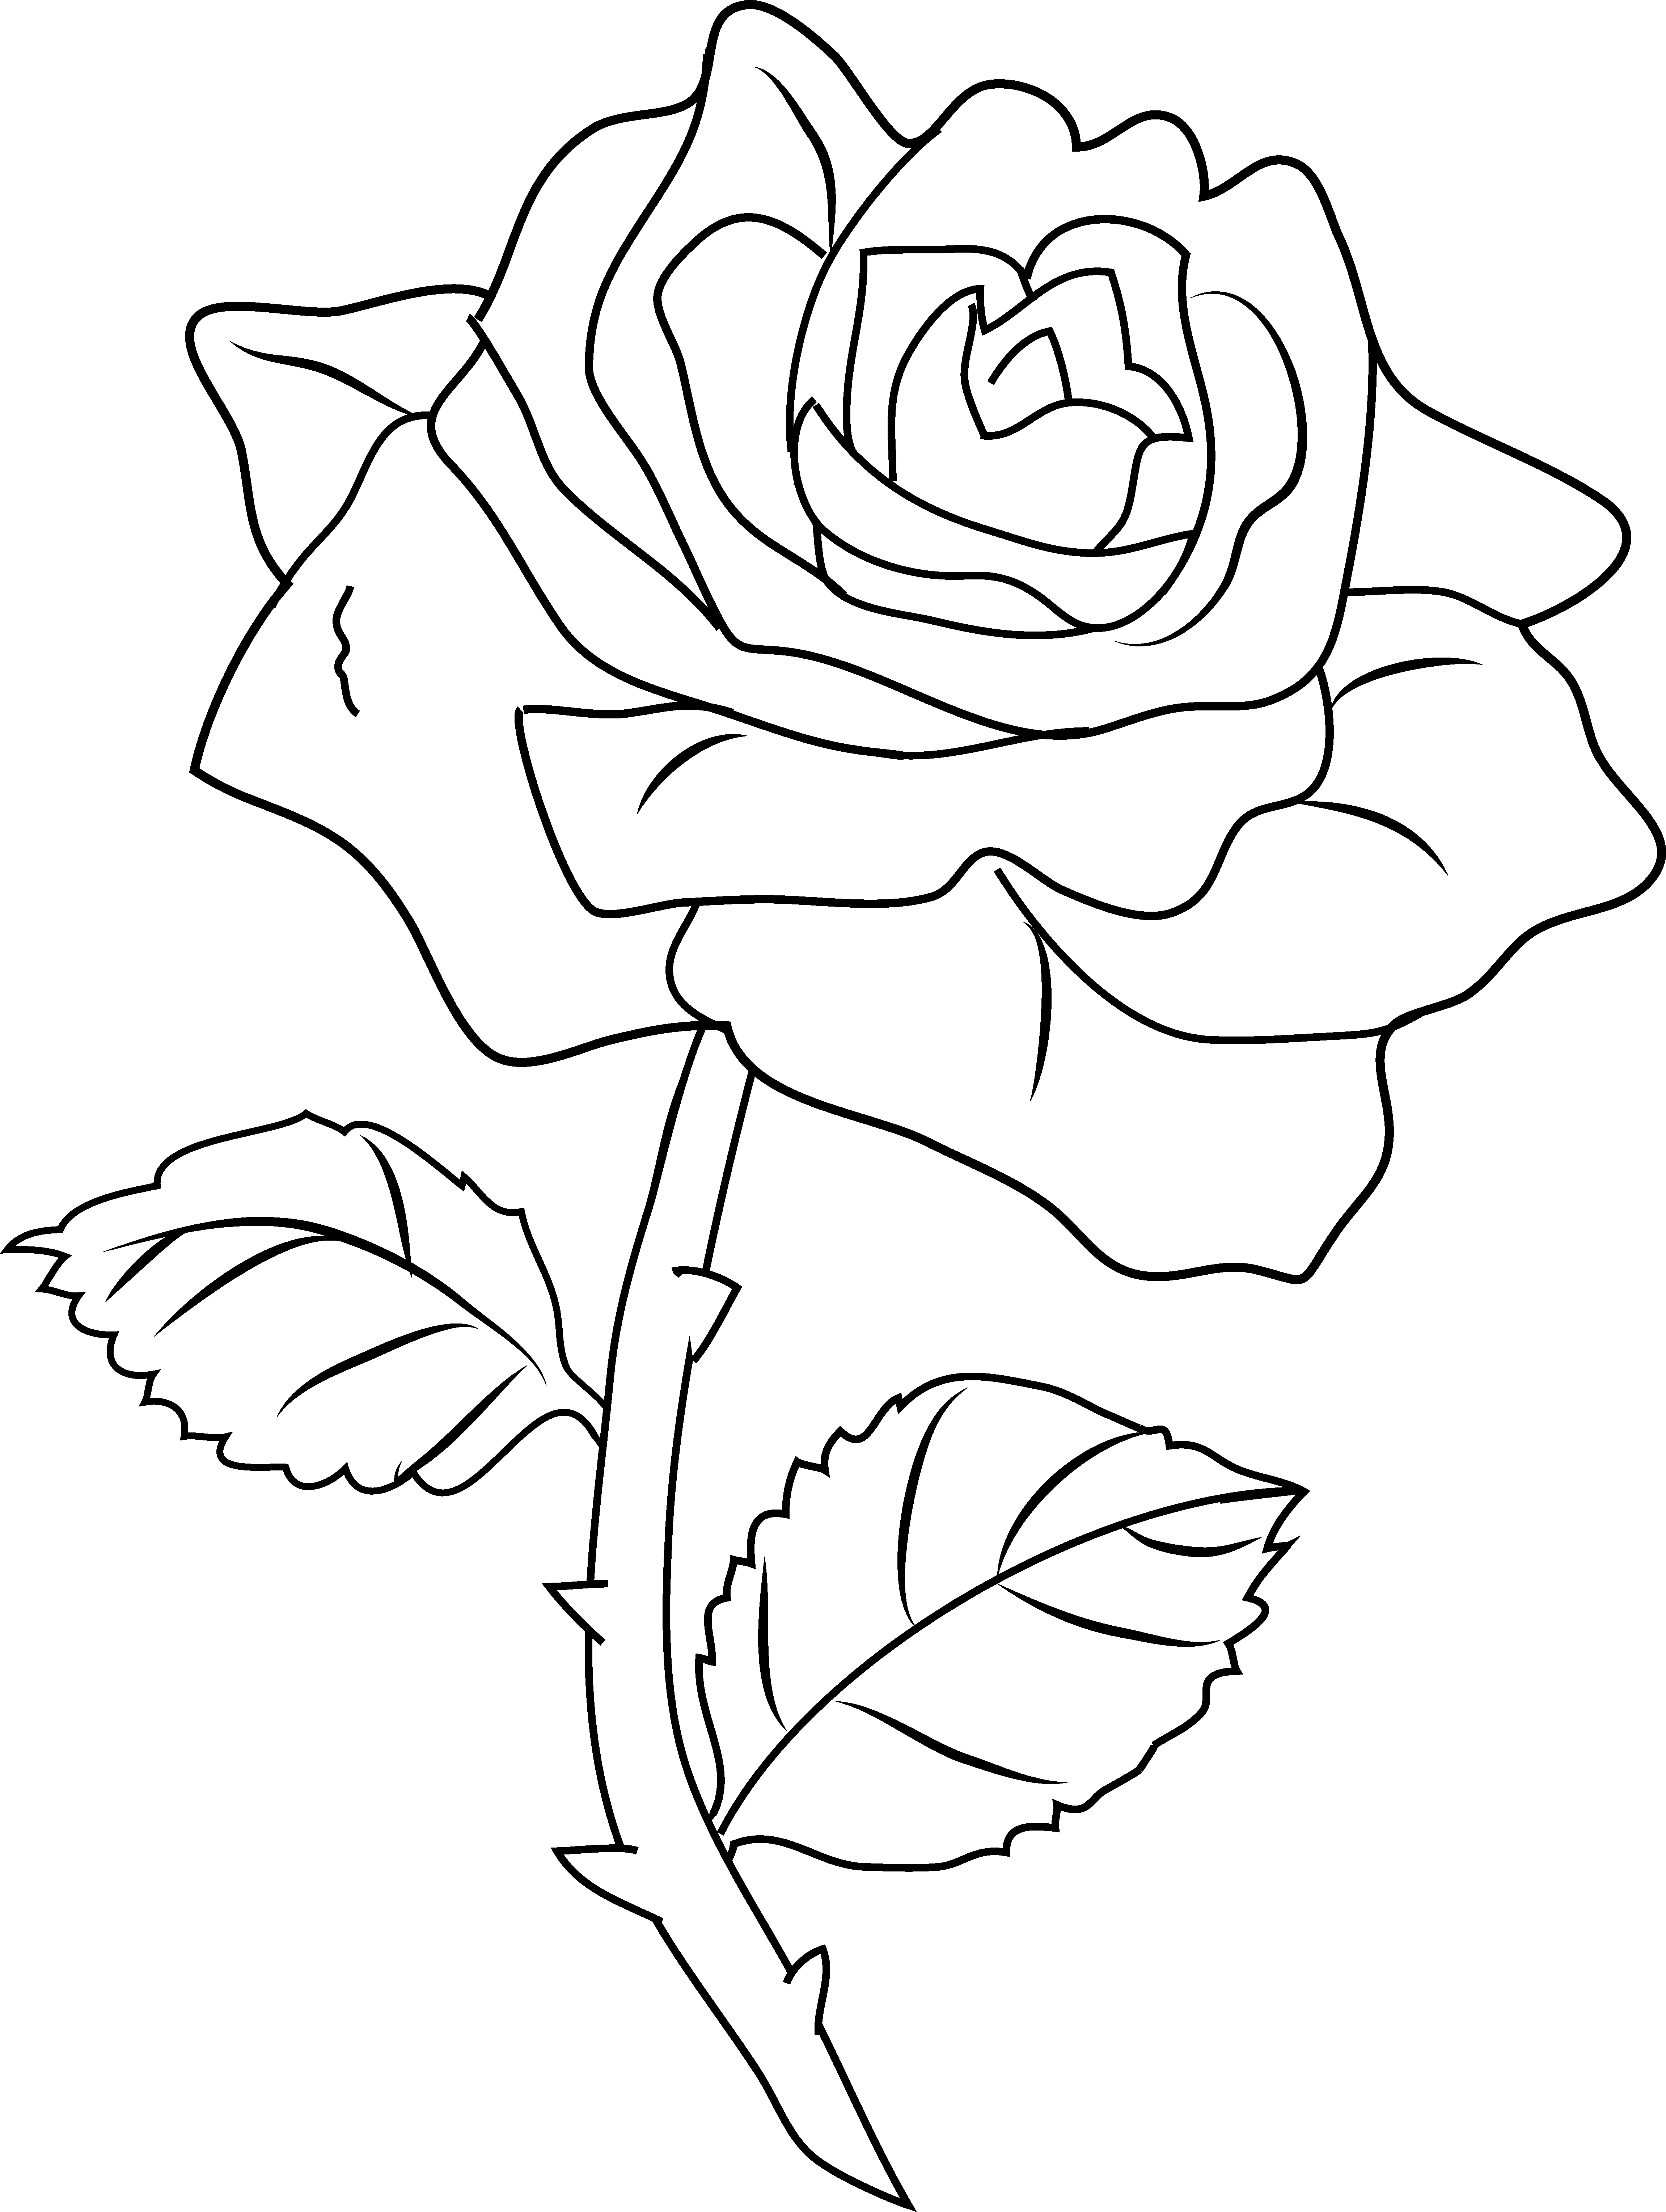 printable-pictures-of-roses-printable-templates